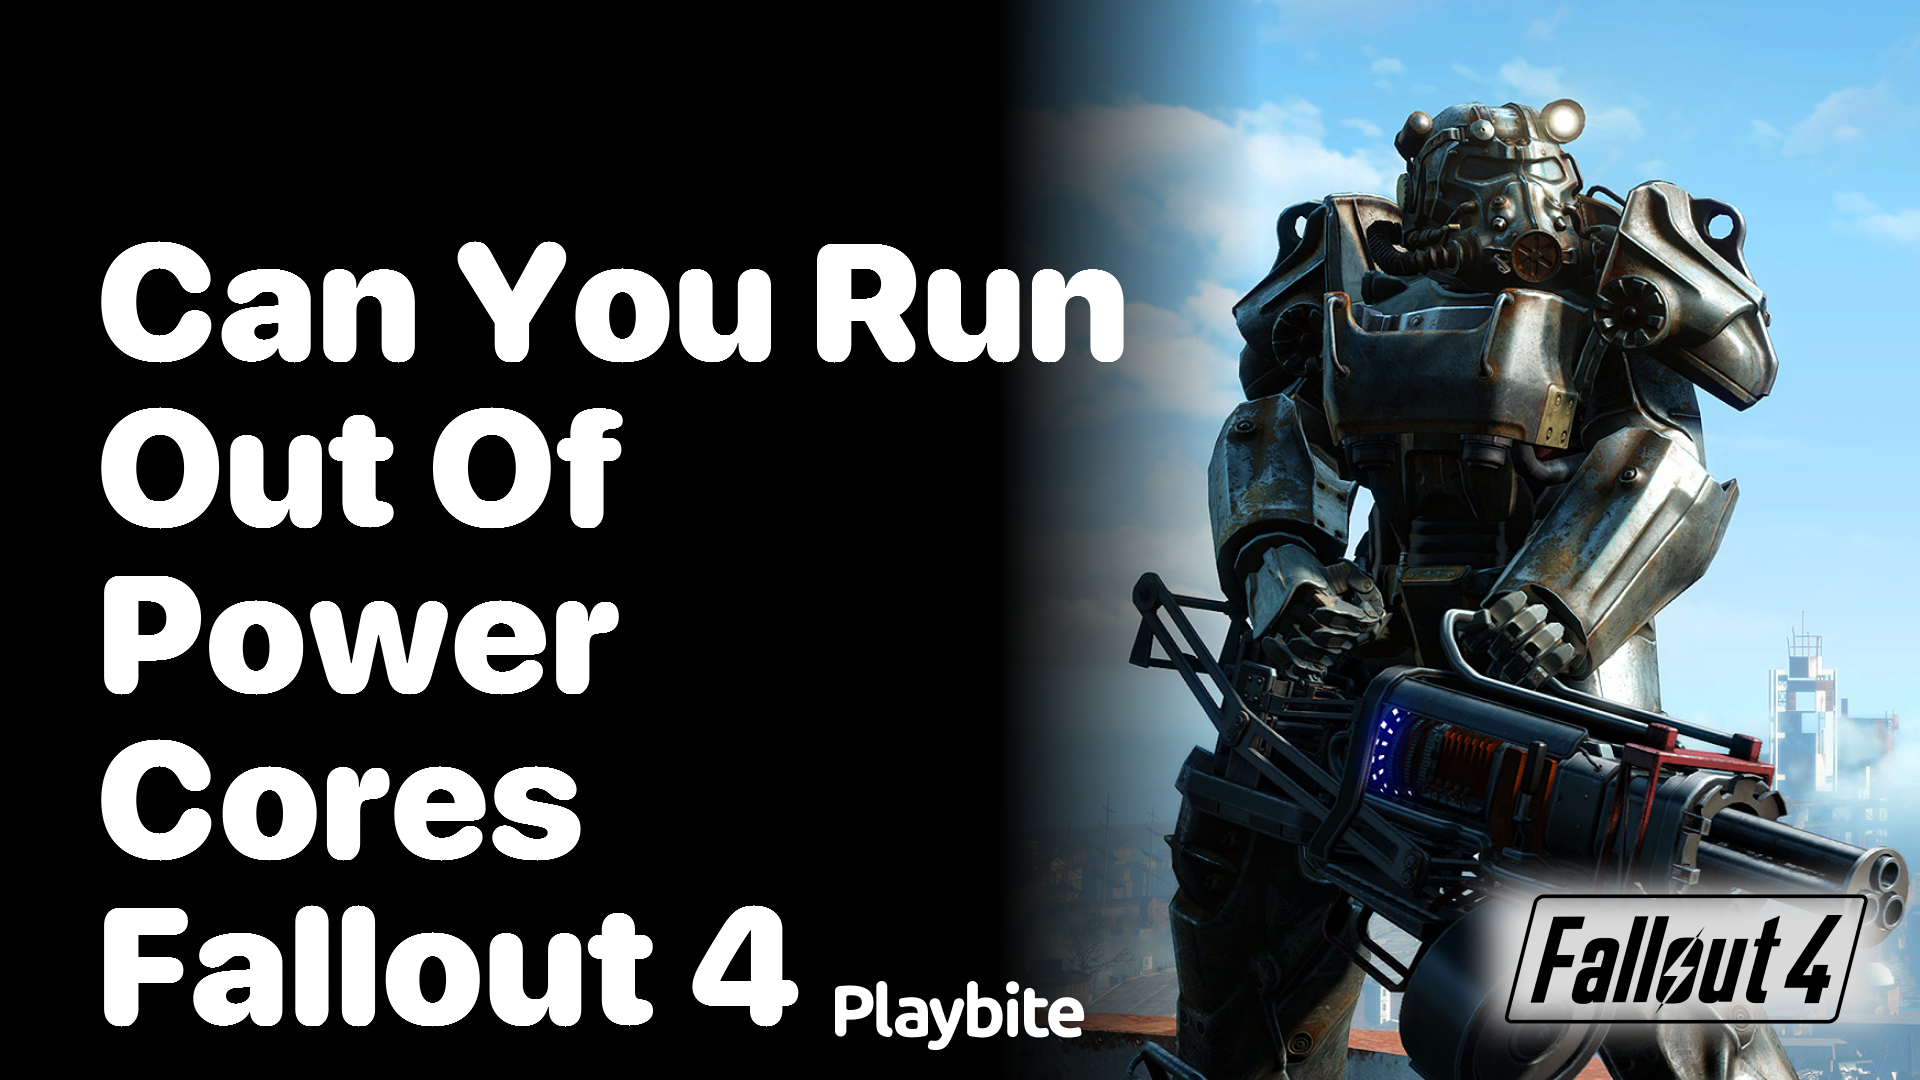 Can You Run out of Power Cores in Fallout 4?